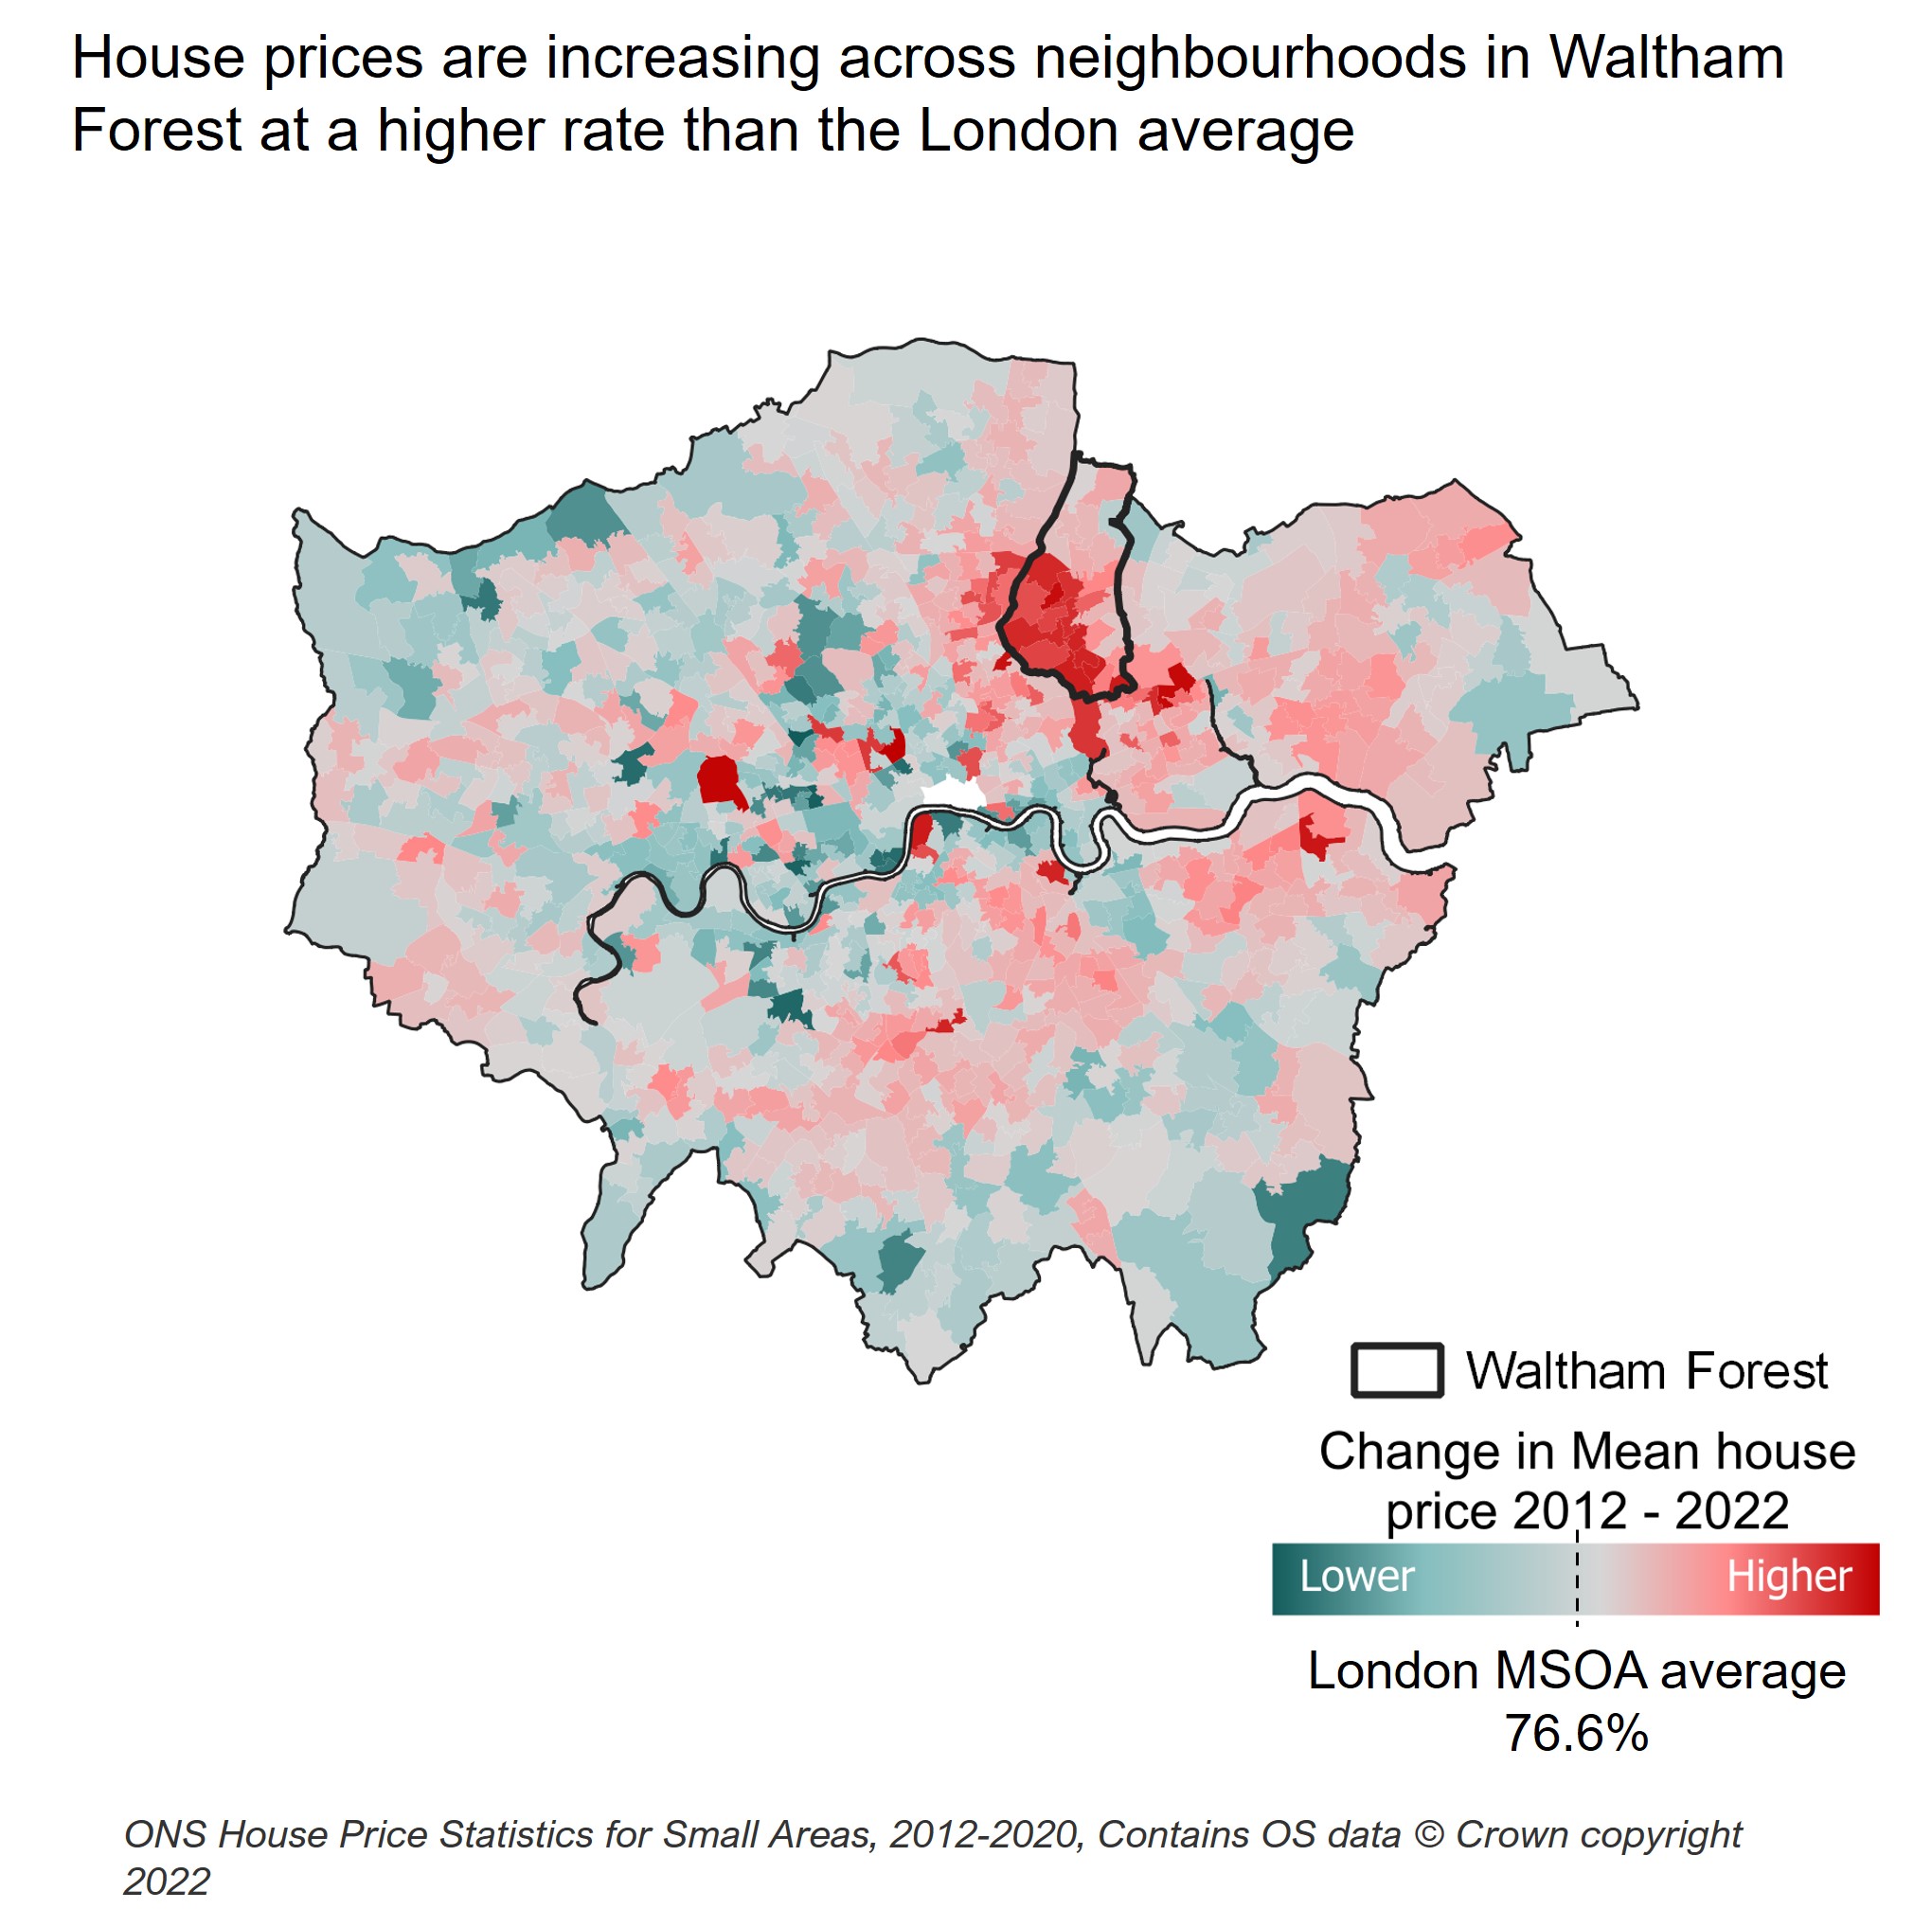 Mean house price change, 2011 - 2021